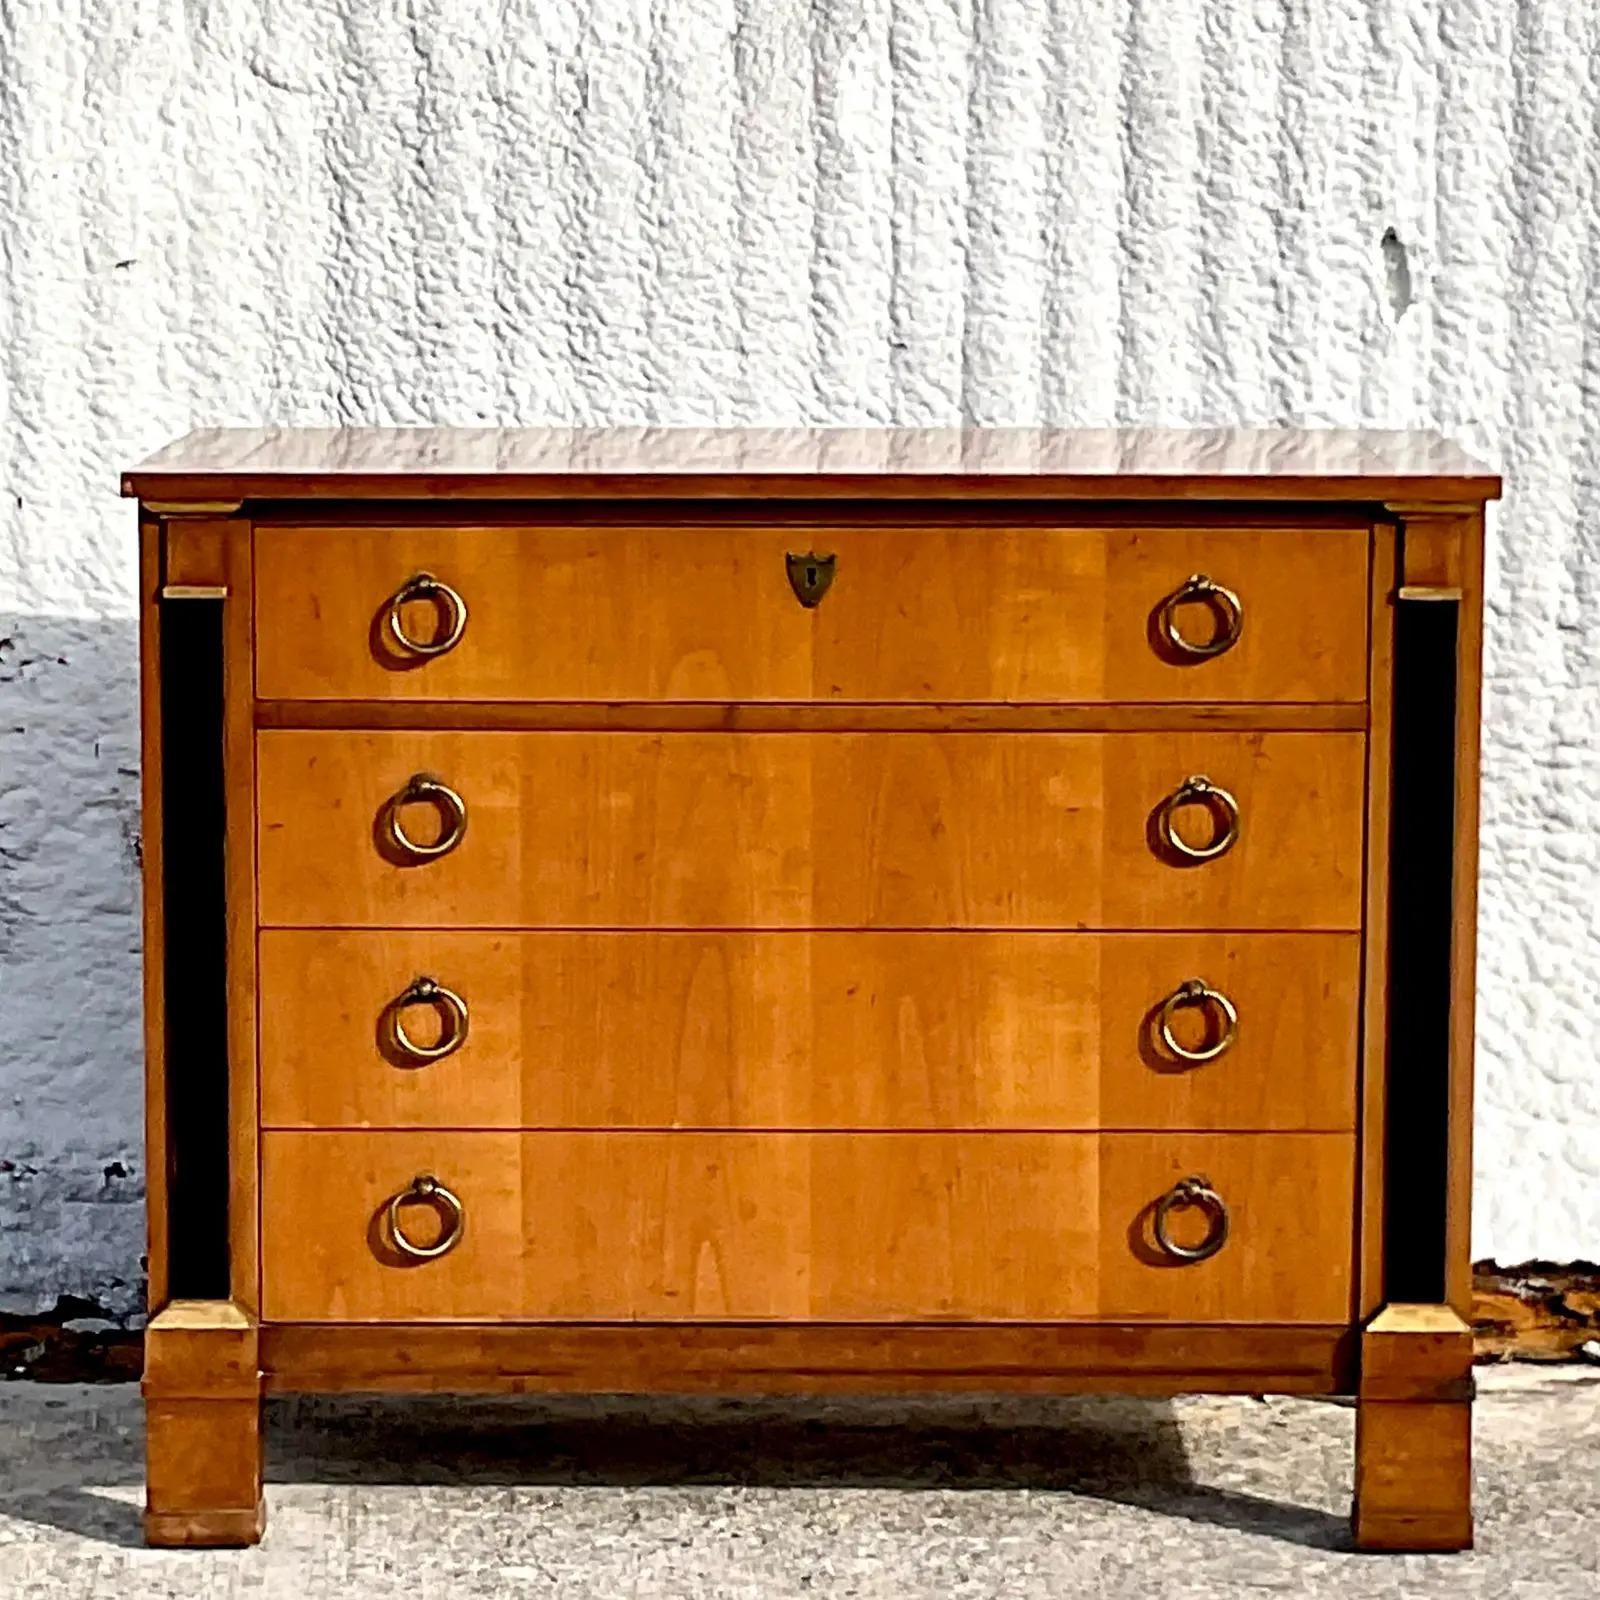 A fabulous vintage French Empire Neoclassical chest of drawers. Made by the iconic Baker Furniture group. Gorgeous wood grain detail and heavy brass hardware. Acquired from a Palm Beach estate.